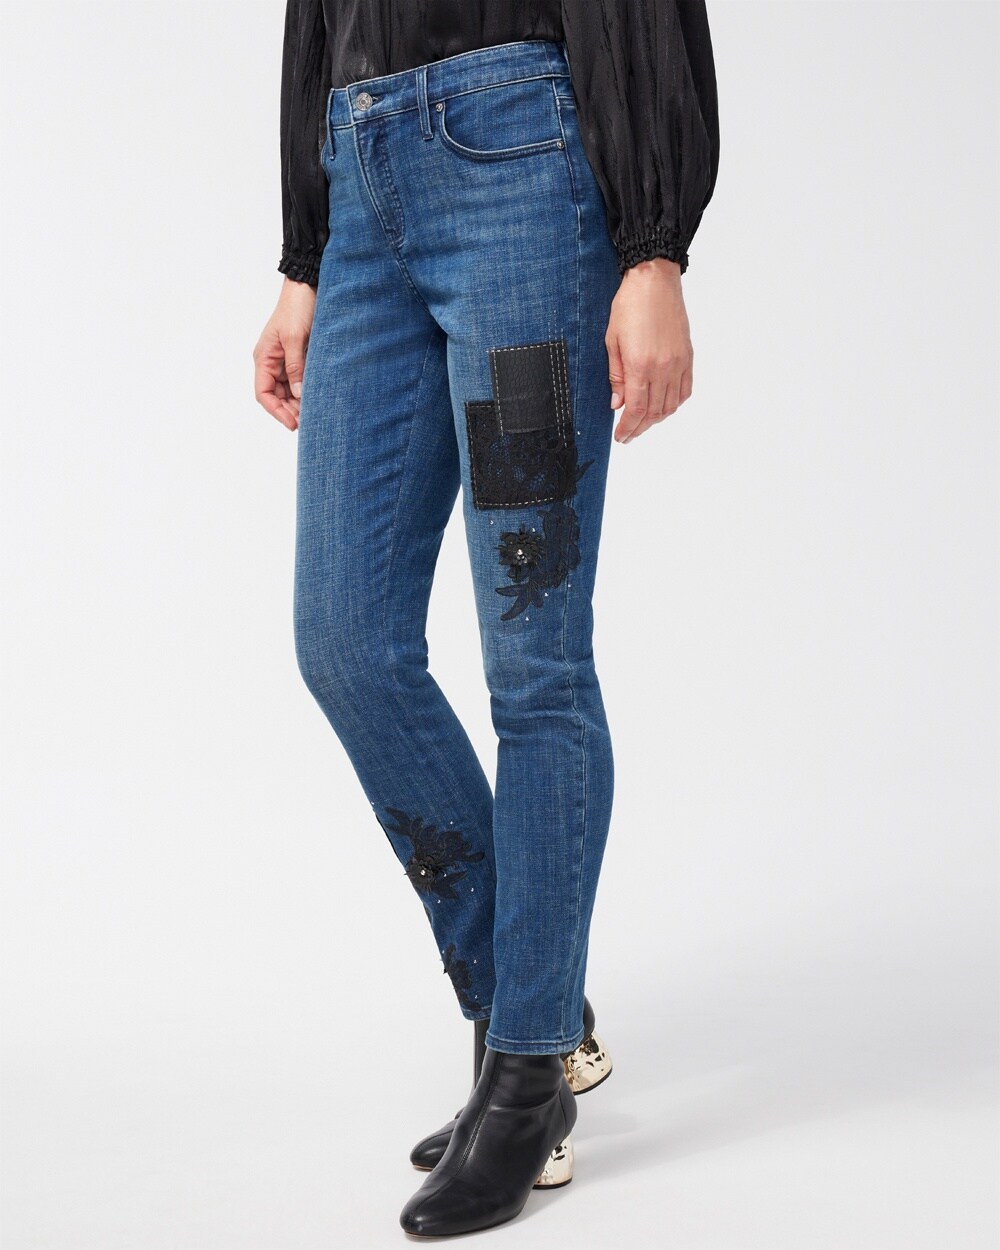 Petite Girlfriend Patchwork Ankle Jeans